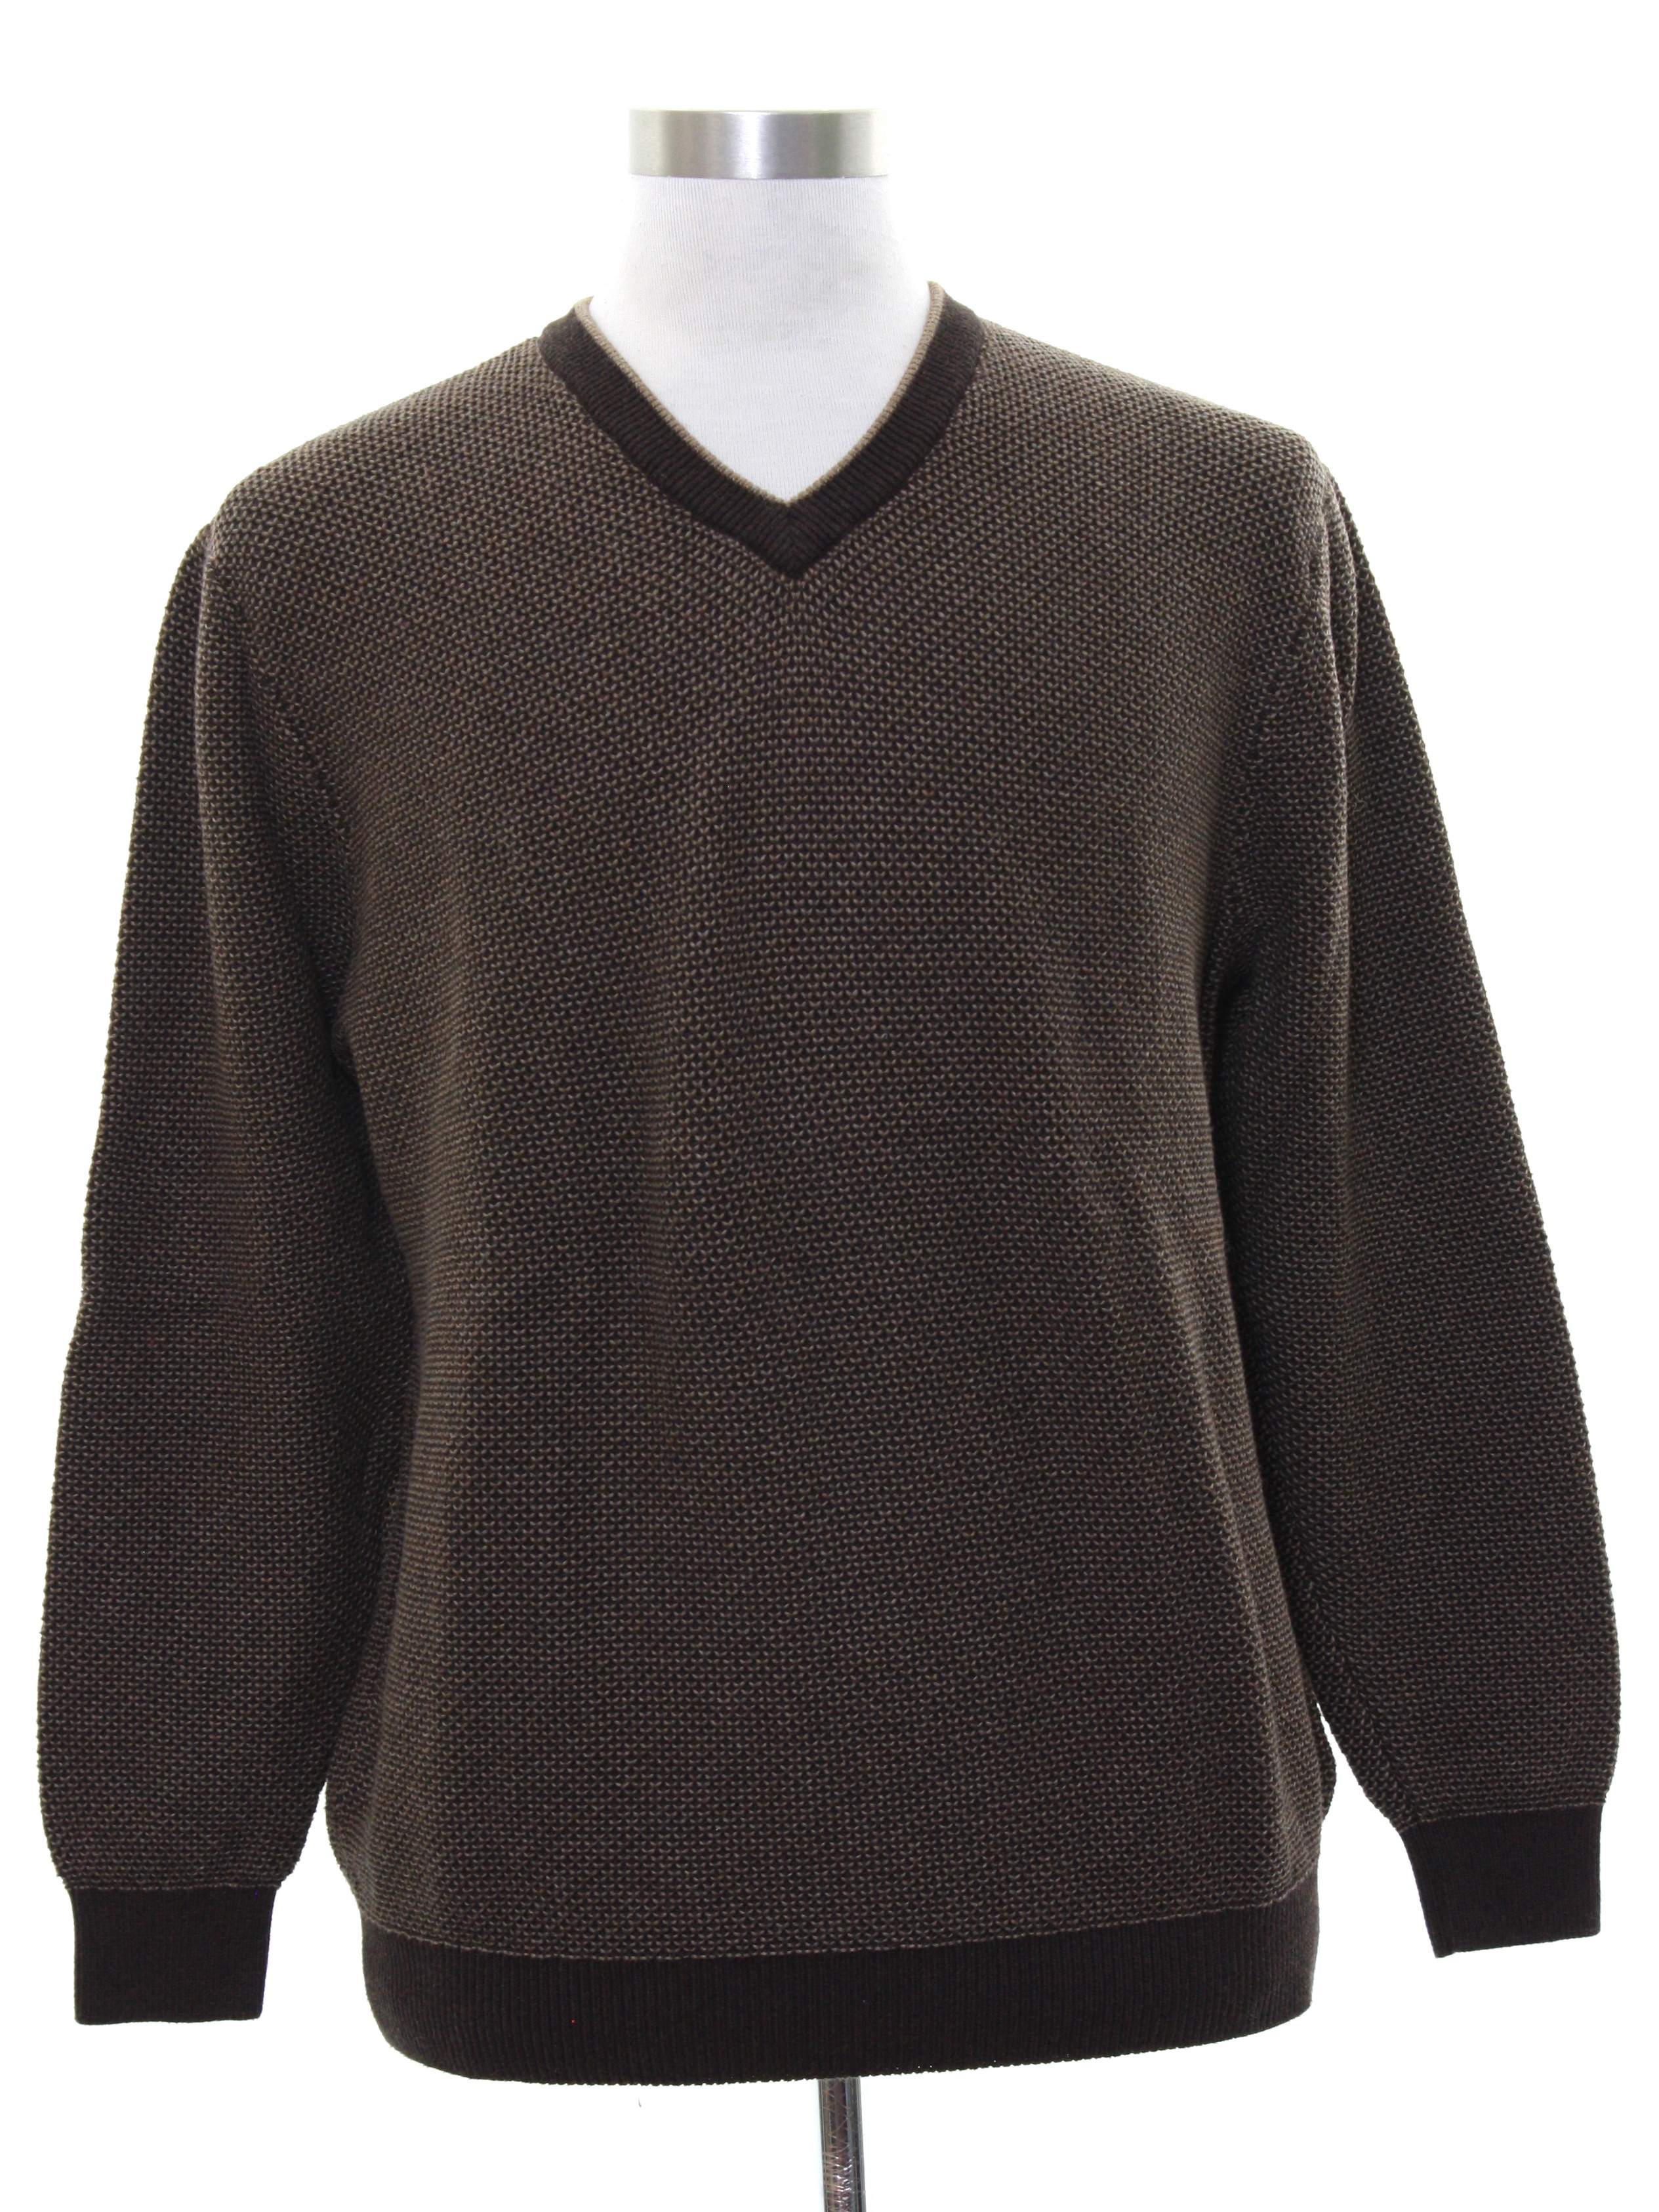 1990s Vintage Sweater: 90s -Roundtree and Yorke- Mens shades of brown ...